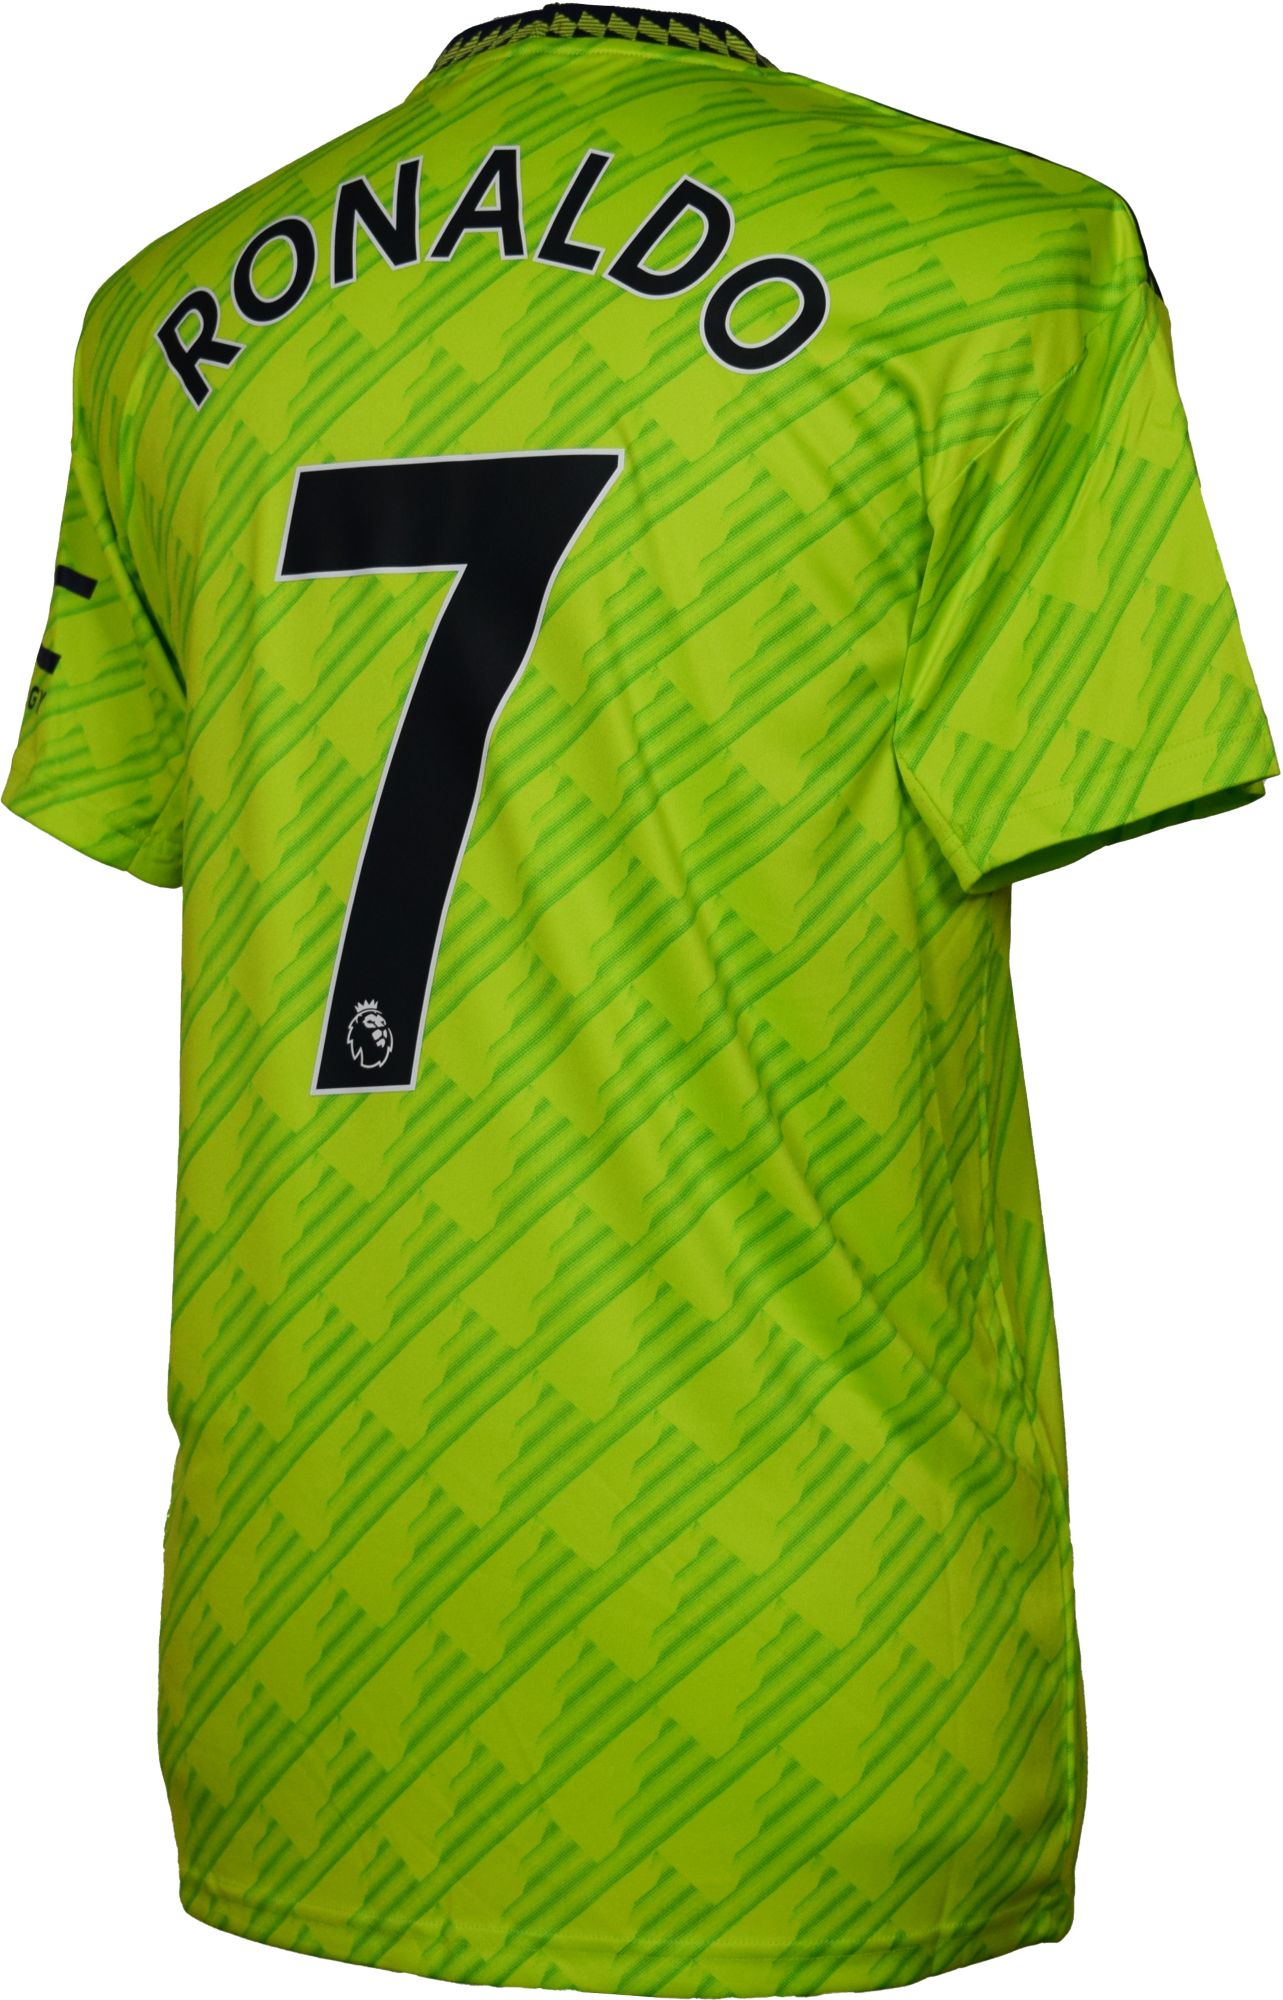 manchester united new green jersey